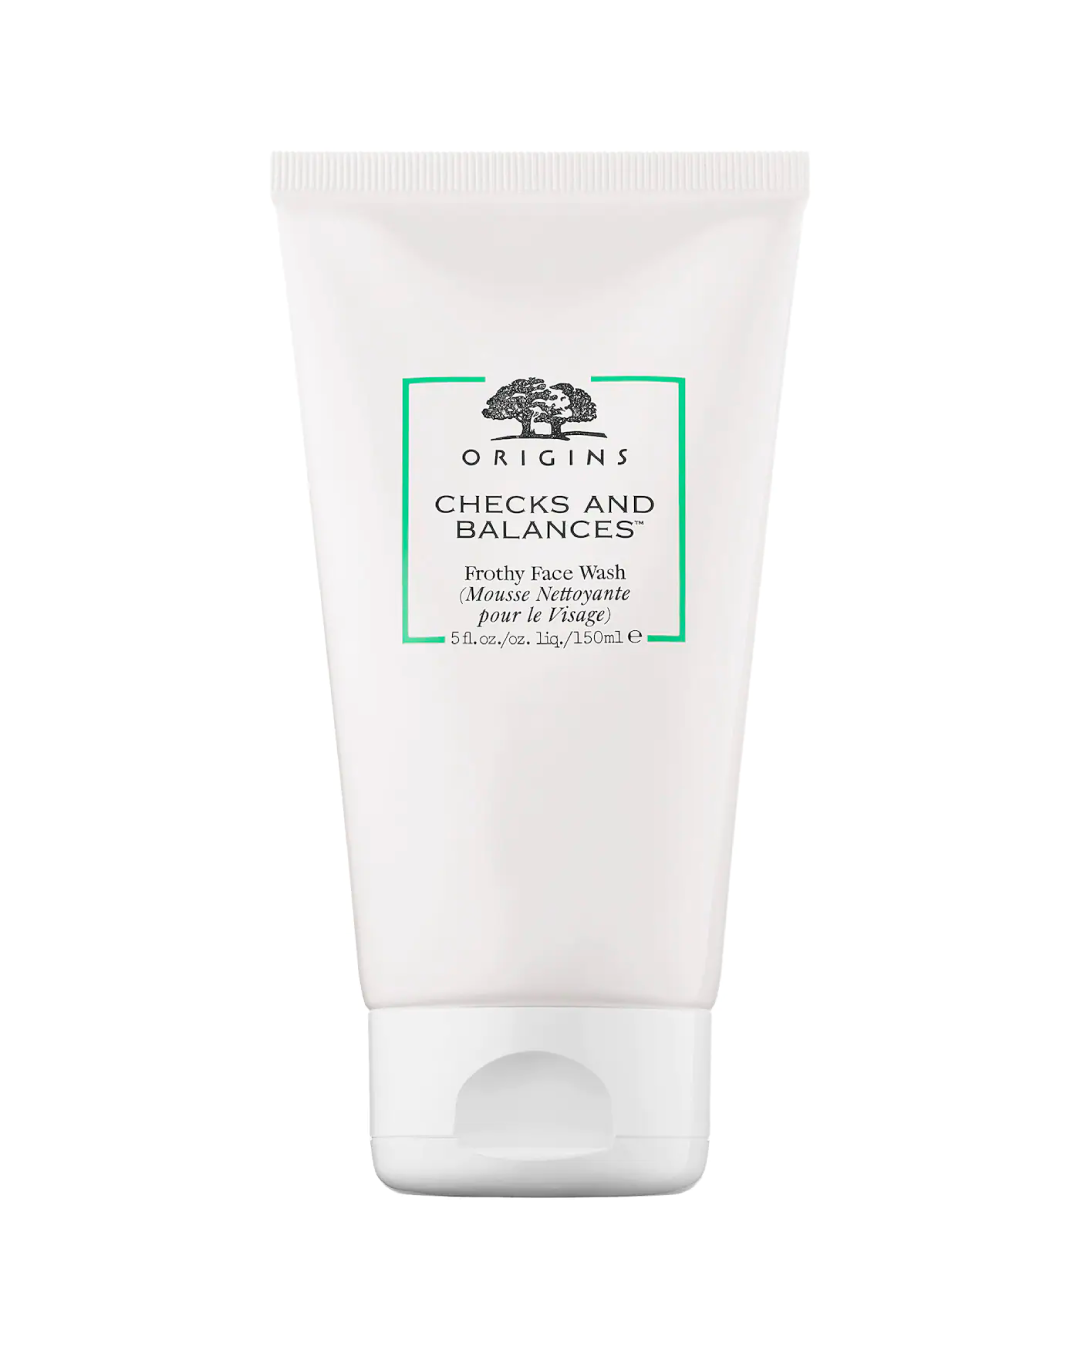 Origins Checks and Balances Frothy Face Wash (150ml) - Best Buy World Philippines